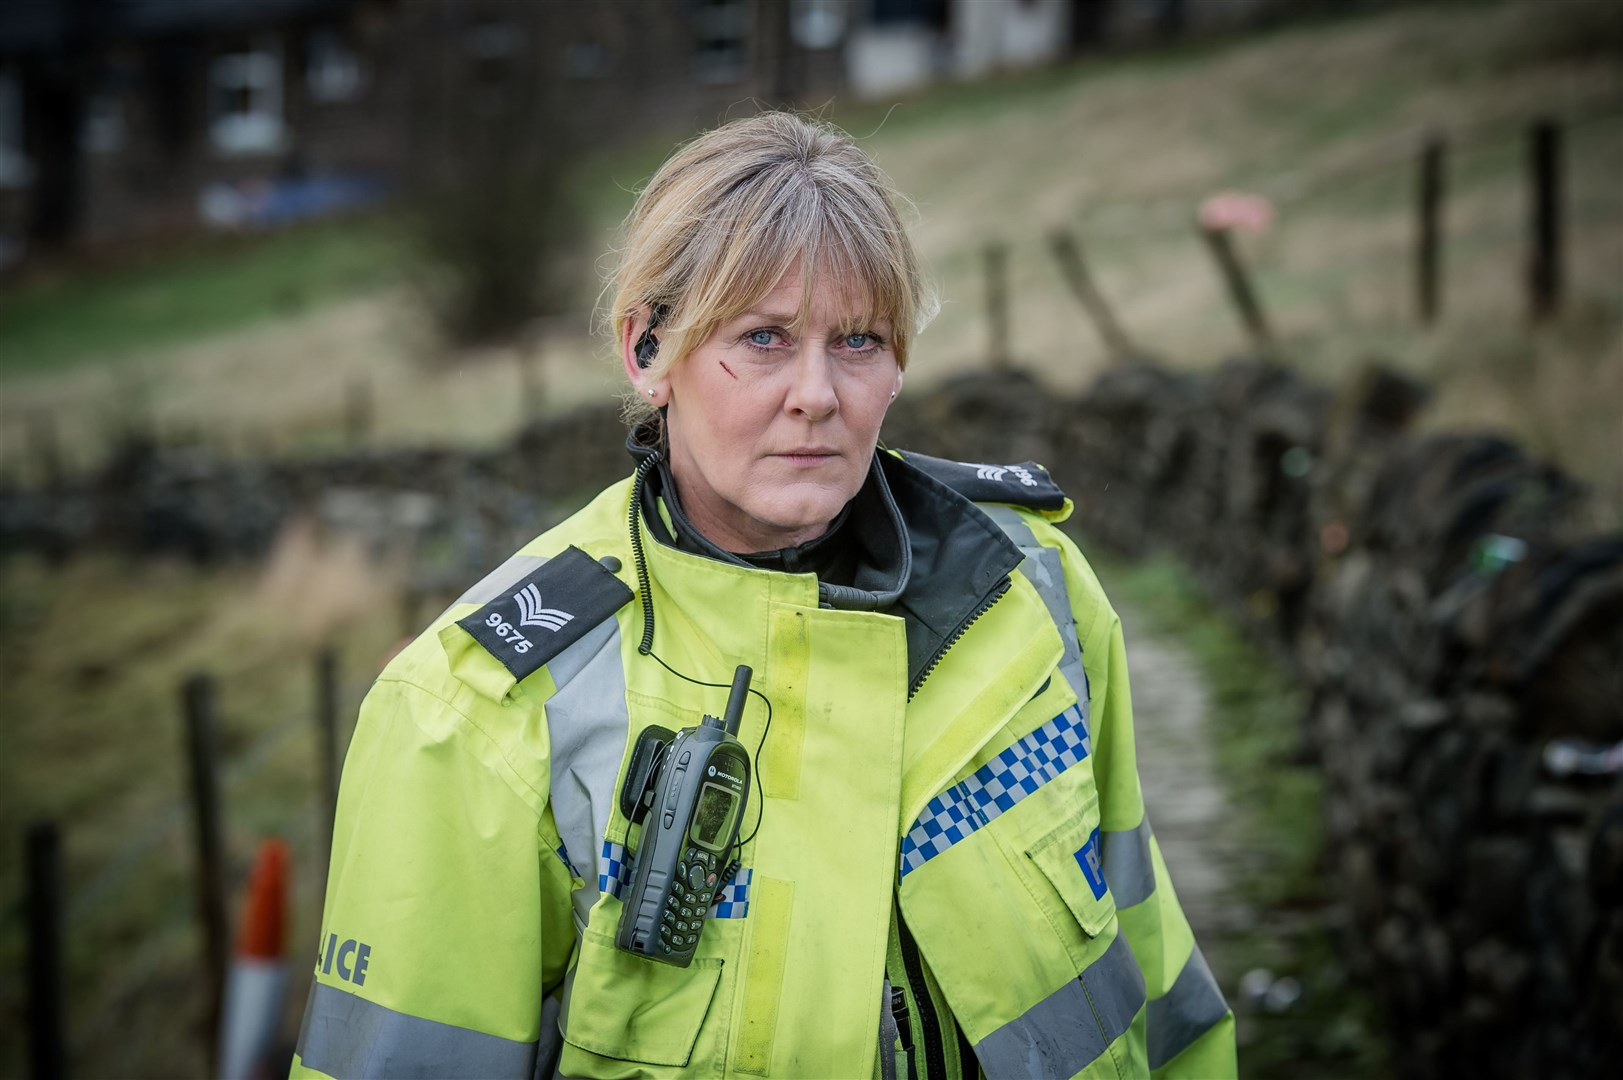 Sarah Lancashire starred in Happy Valley which was the top TV search on Google in the UK in 2023 (Ben Blackall/BBC/PA)